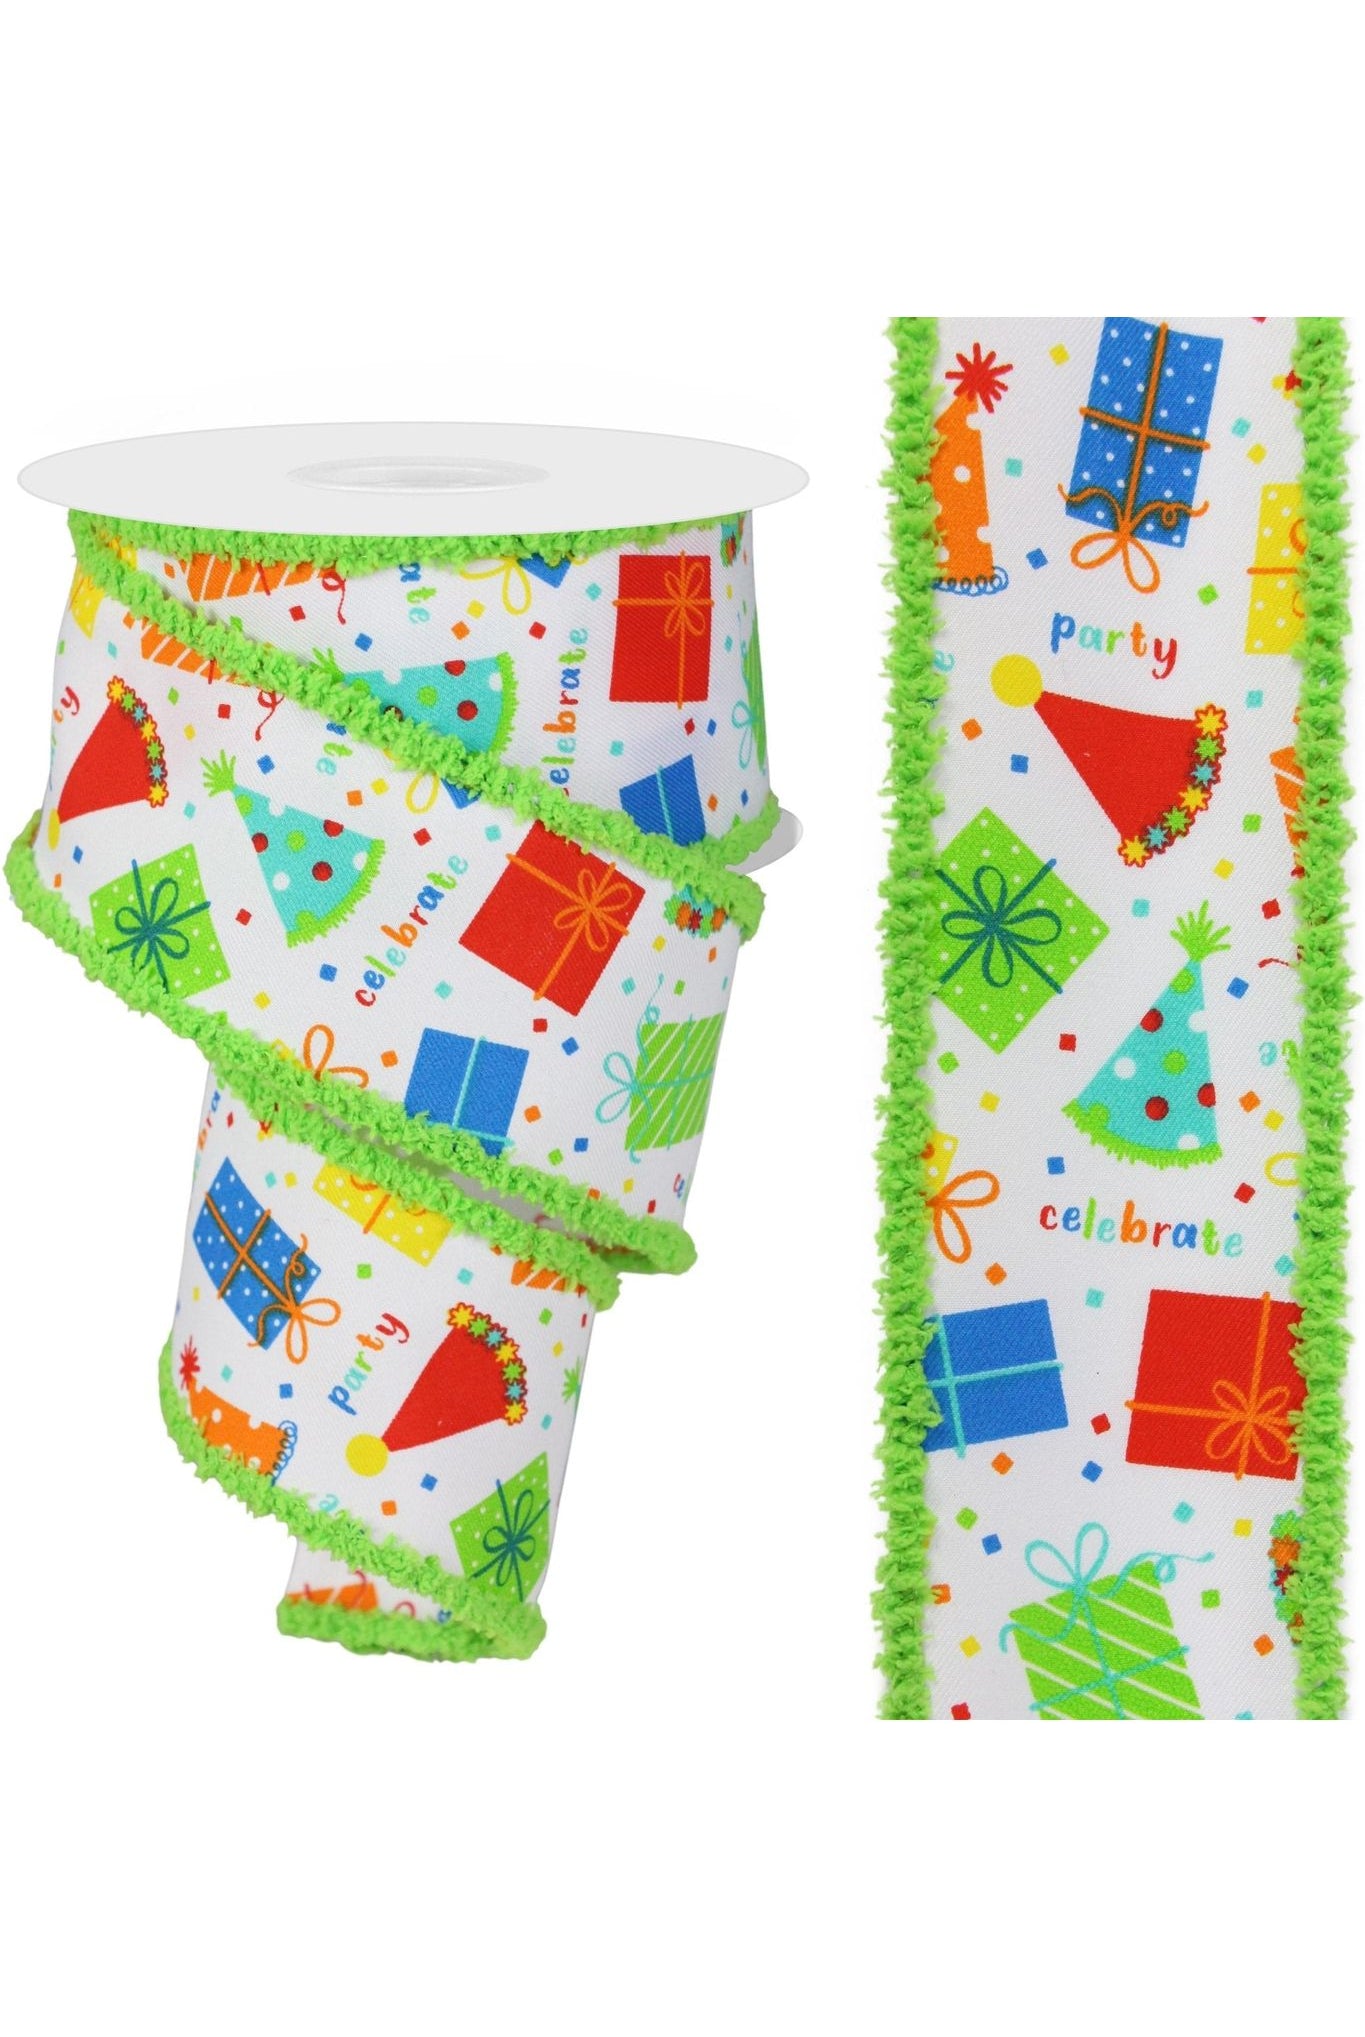 Shop For 2.5" Birthday Party Gifts Ribbon: Primary Colors RGC802427